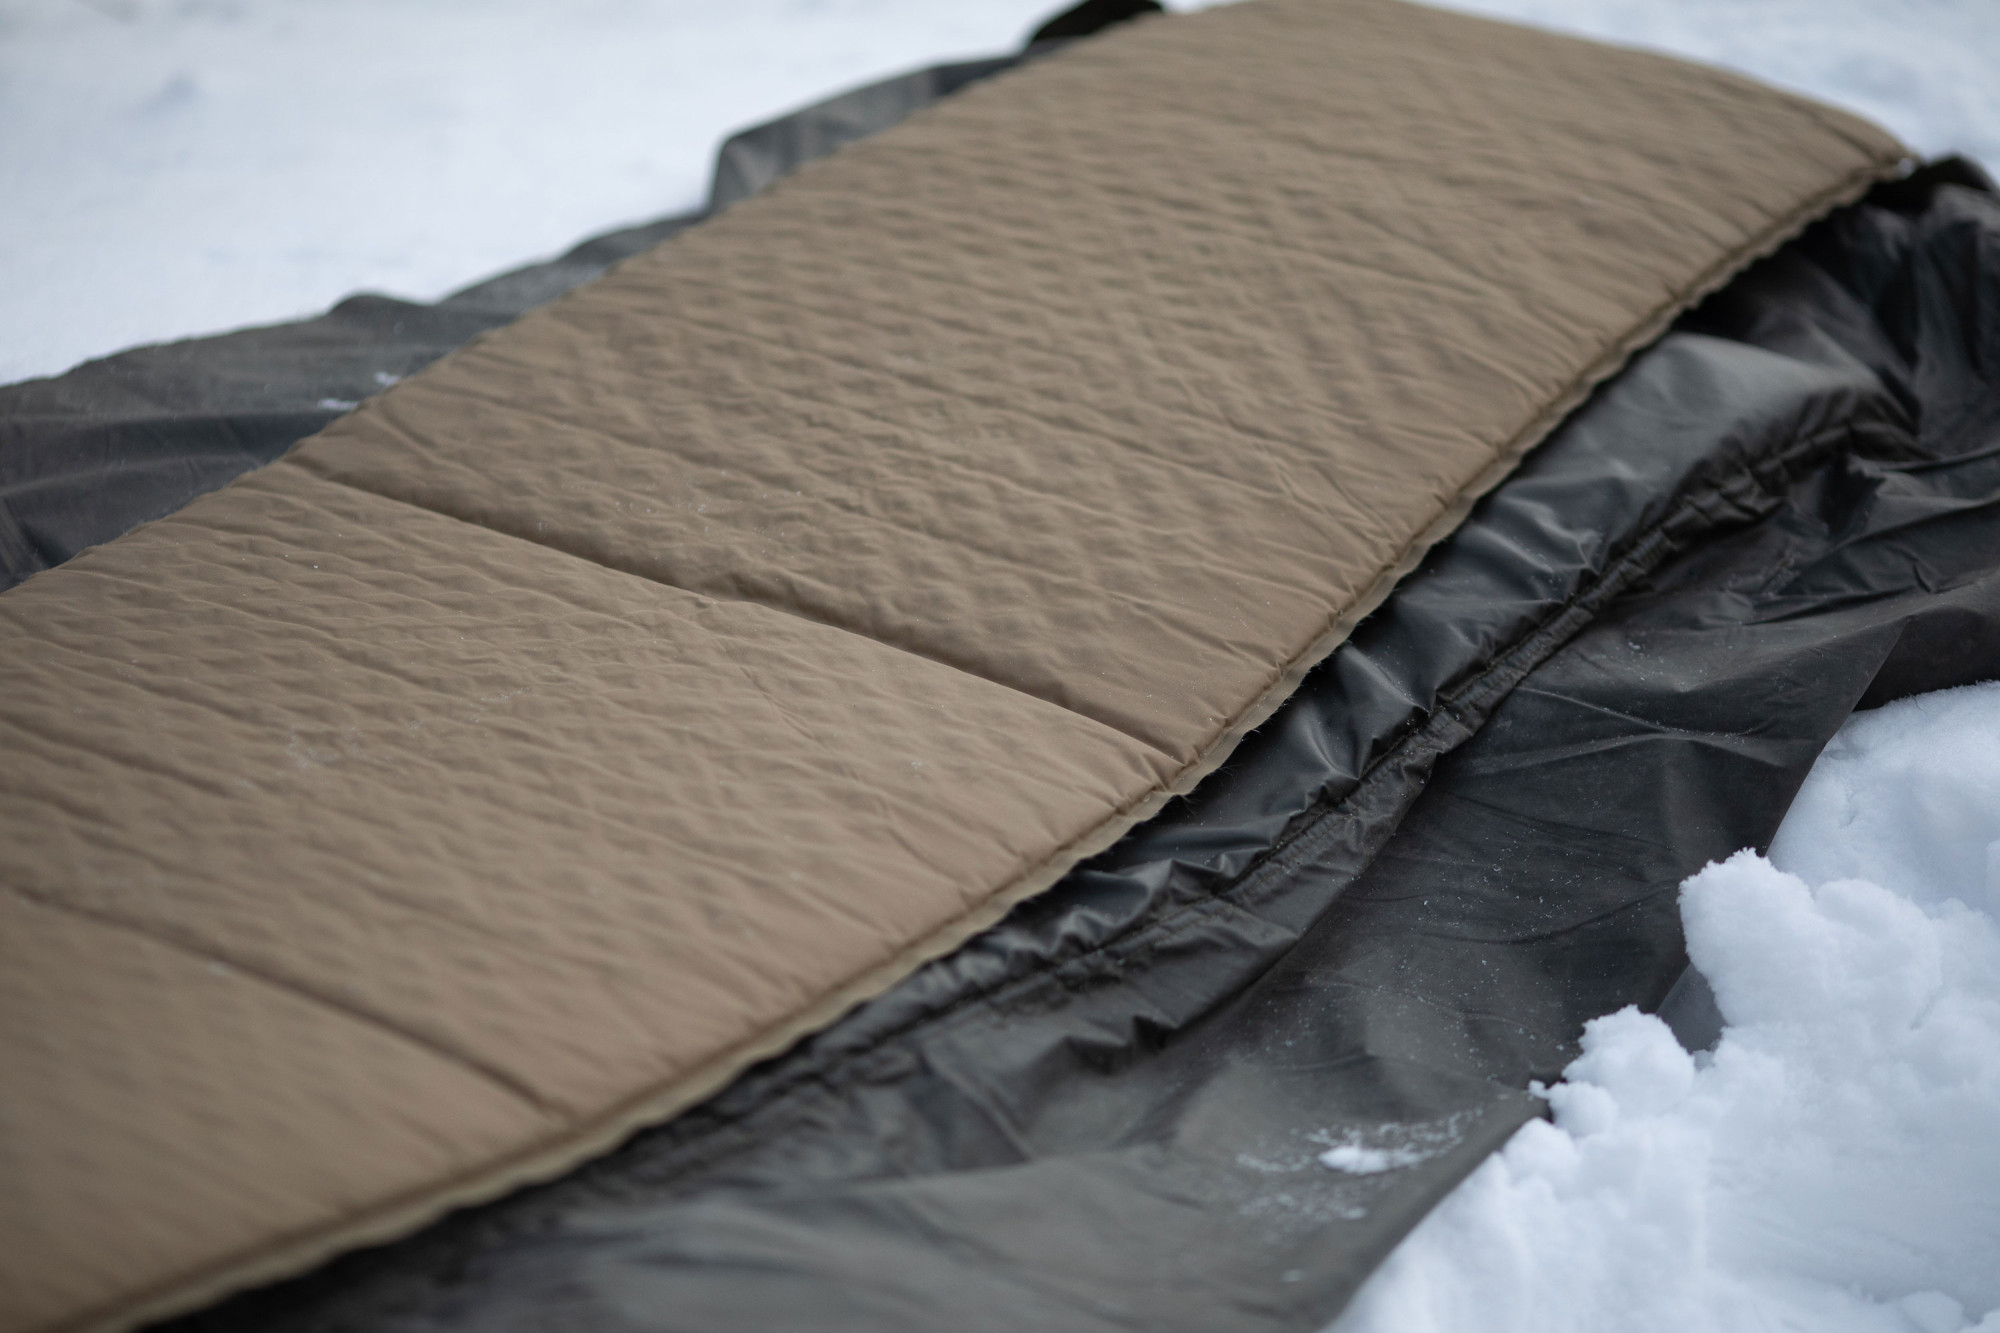 A thin inflatable sleeping pad on top of the Savotta FDF Sleeping Pad in snow